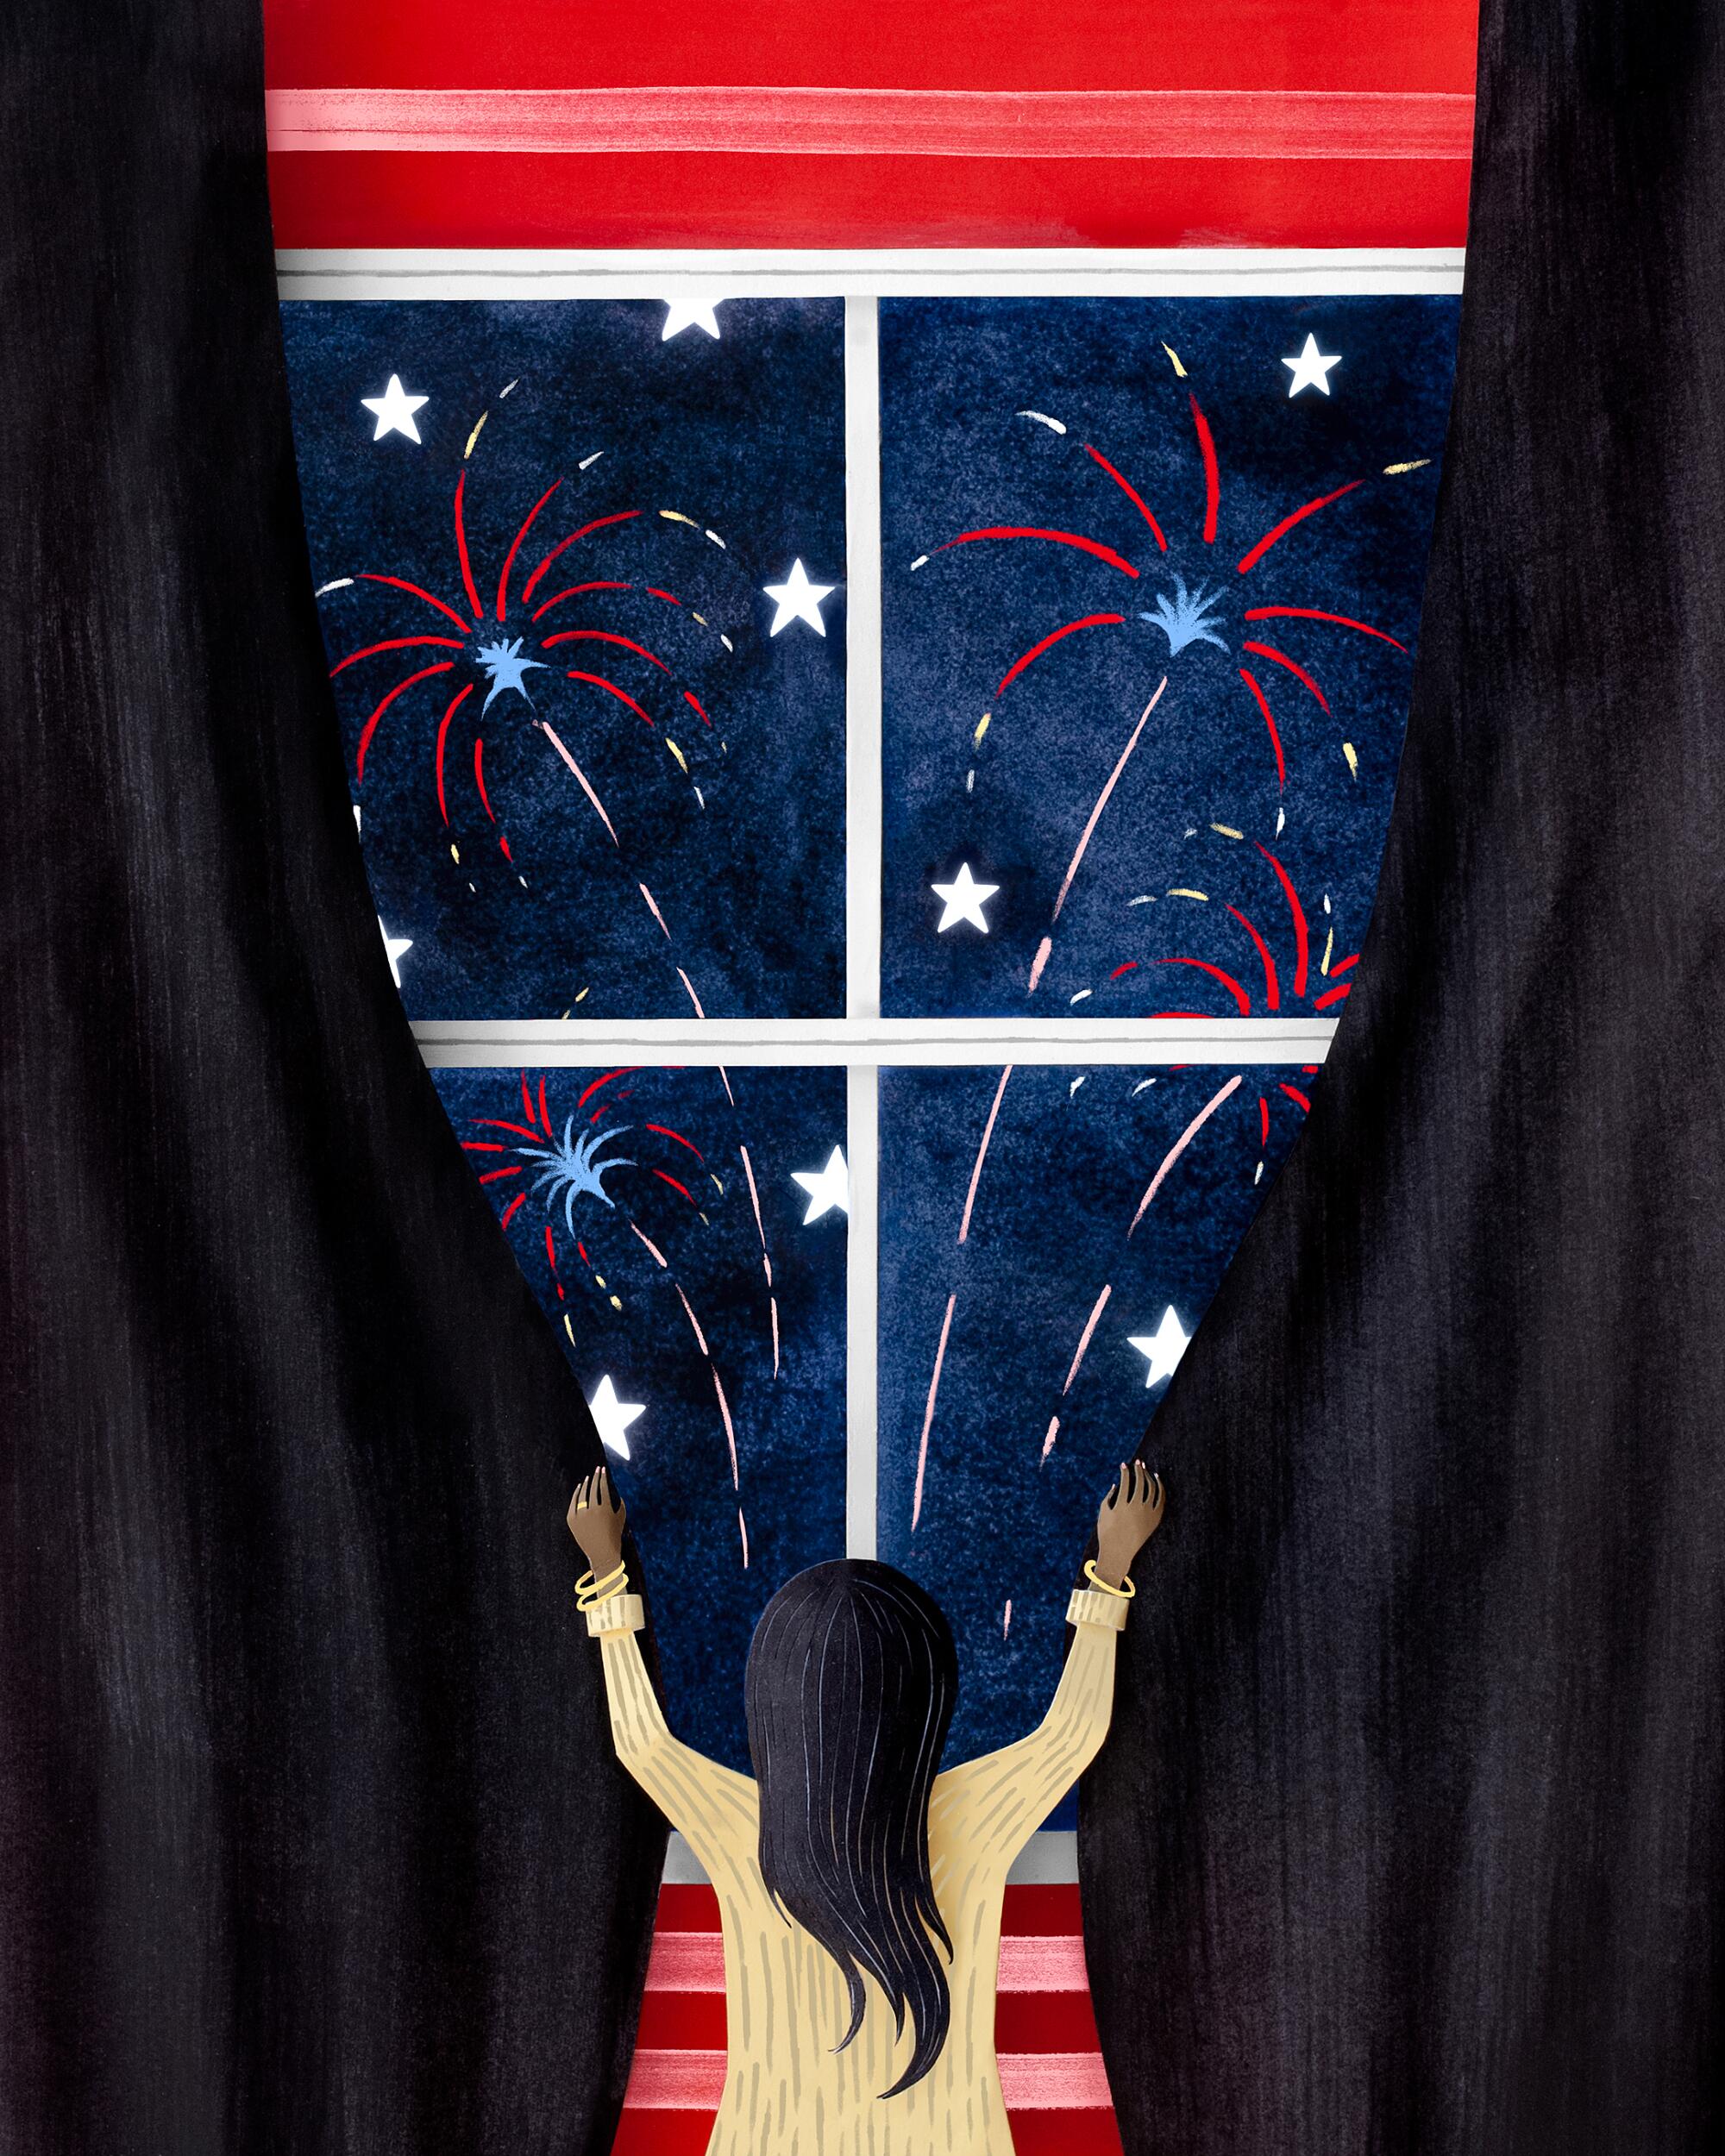 Illustration of a woman closing dark curtains on a scene of red white and blue fireworks outside the window